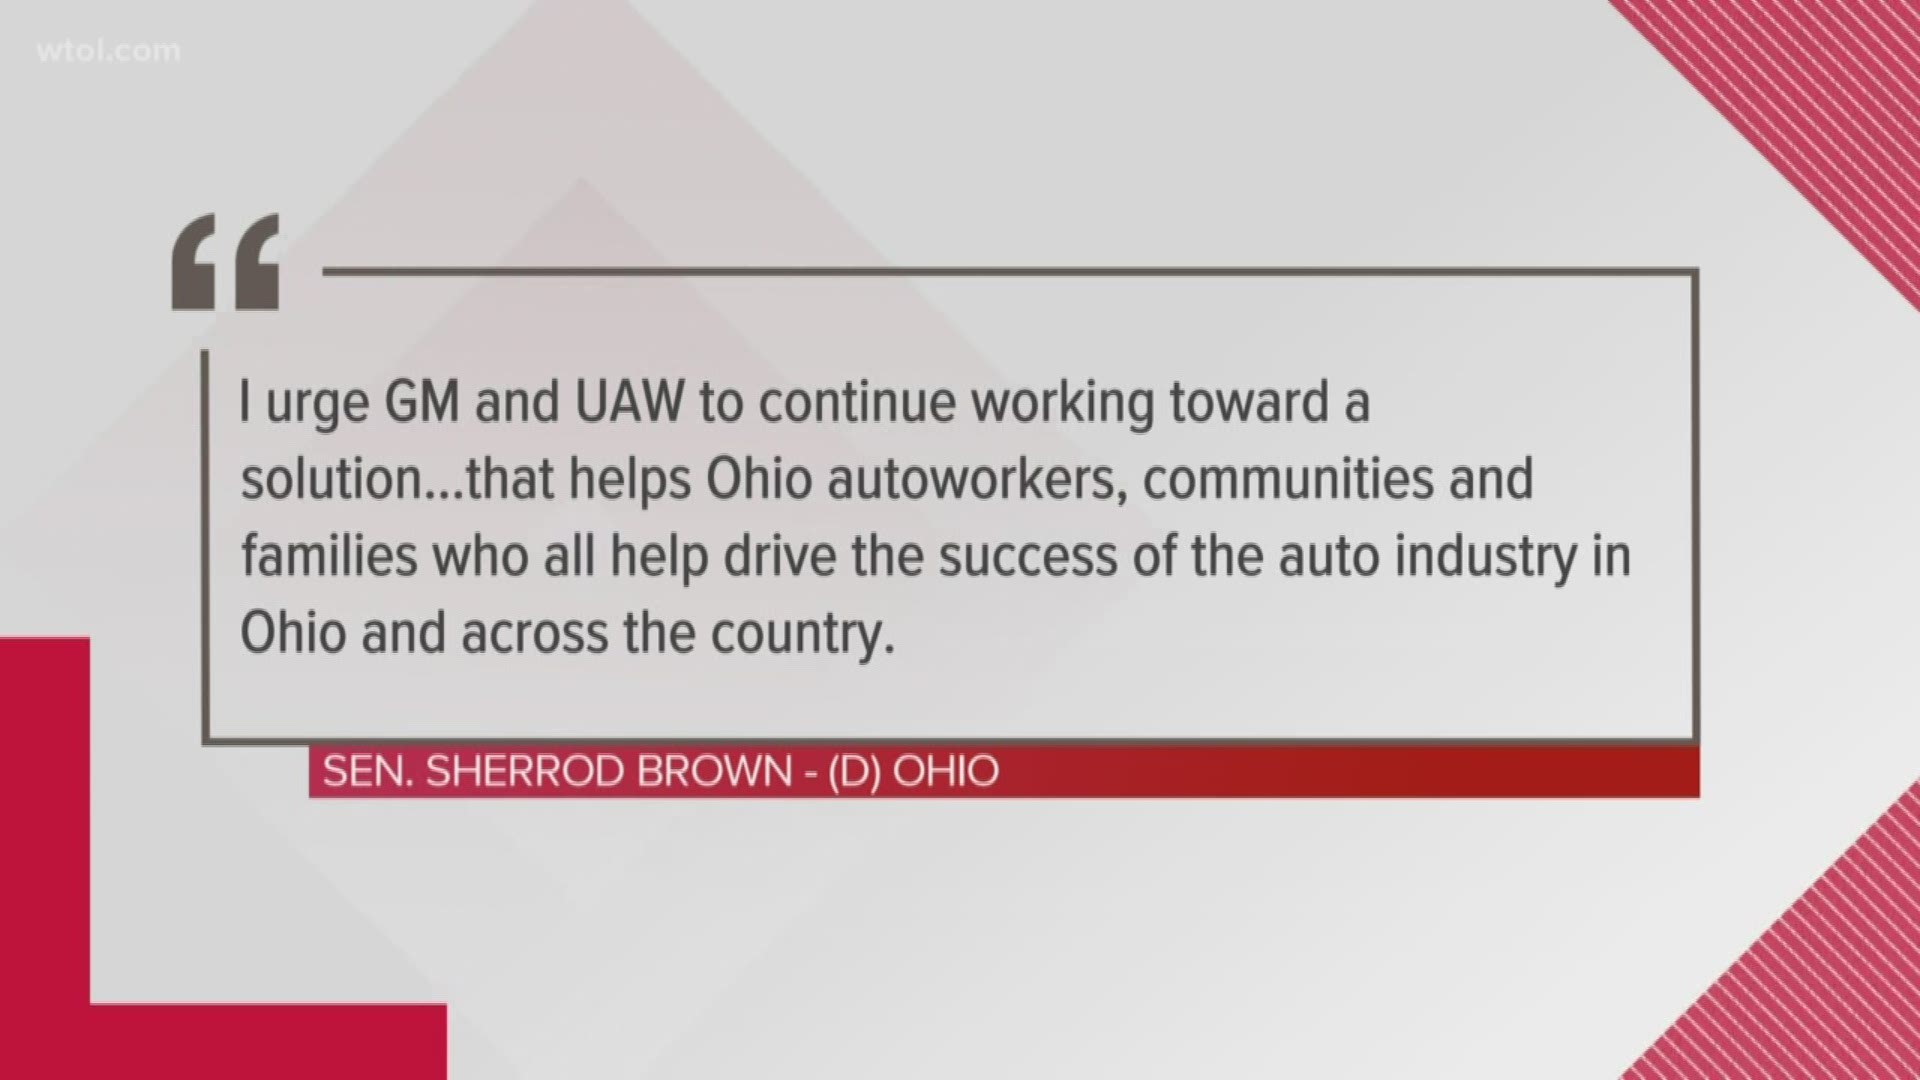 Both leaders urged union leaders and GM officials to reach a deal.